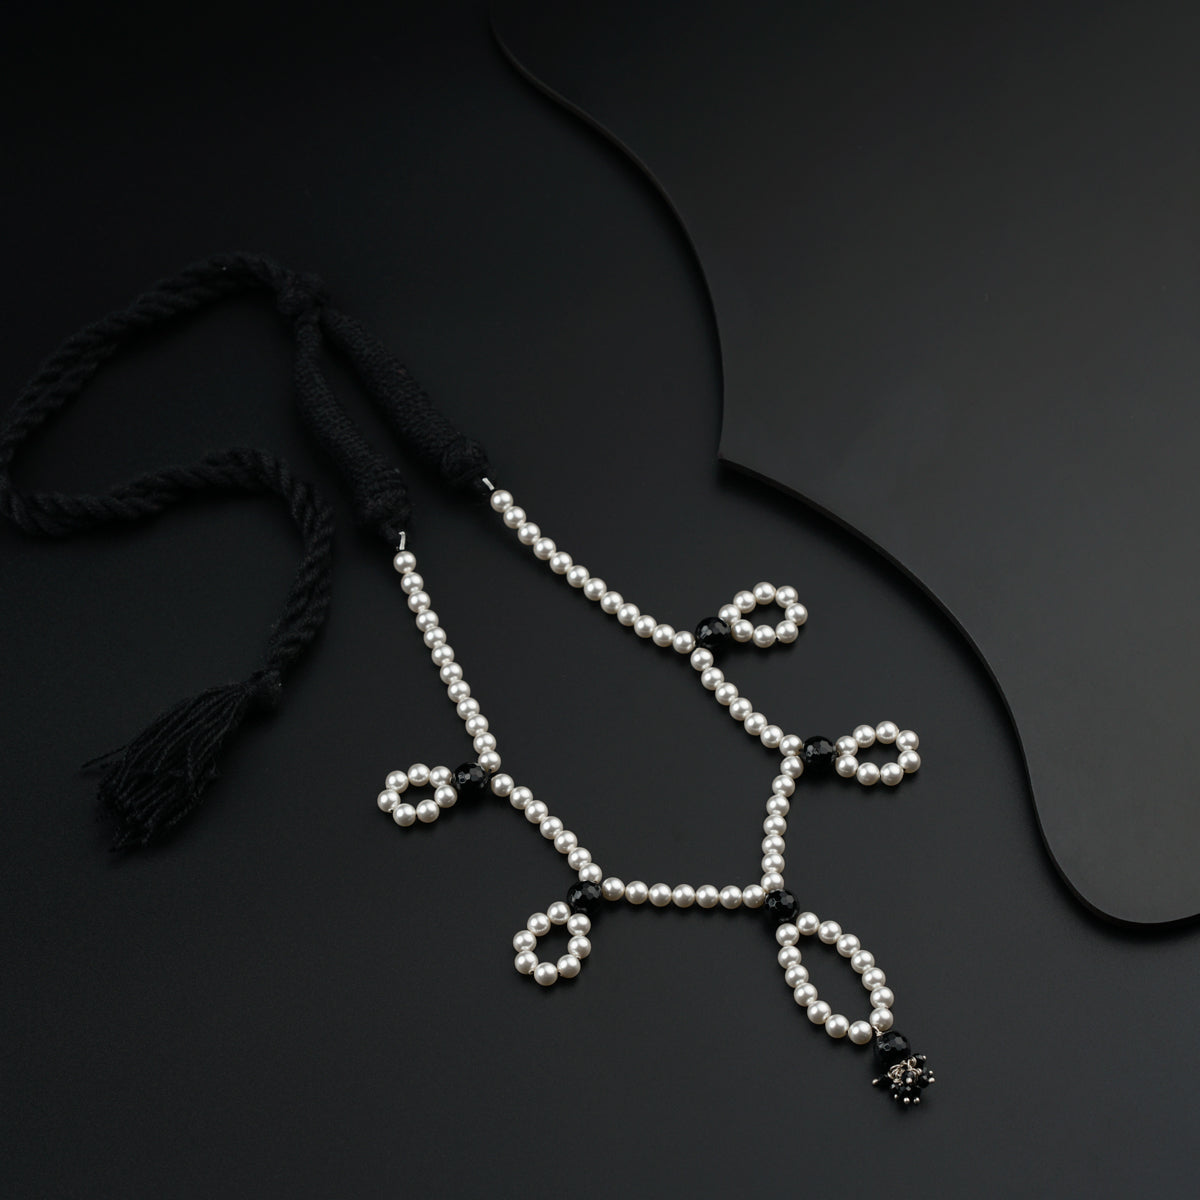 a necklace with pearls and a tassel on a black surface